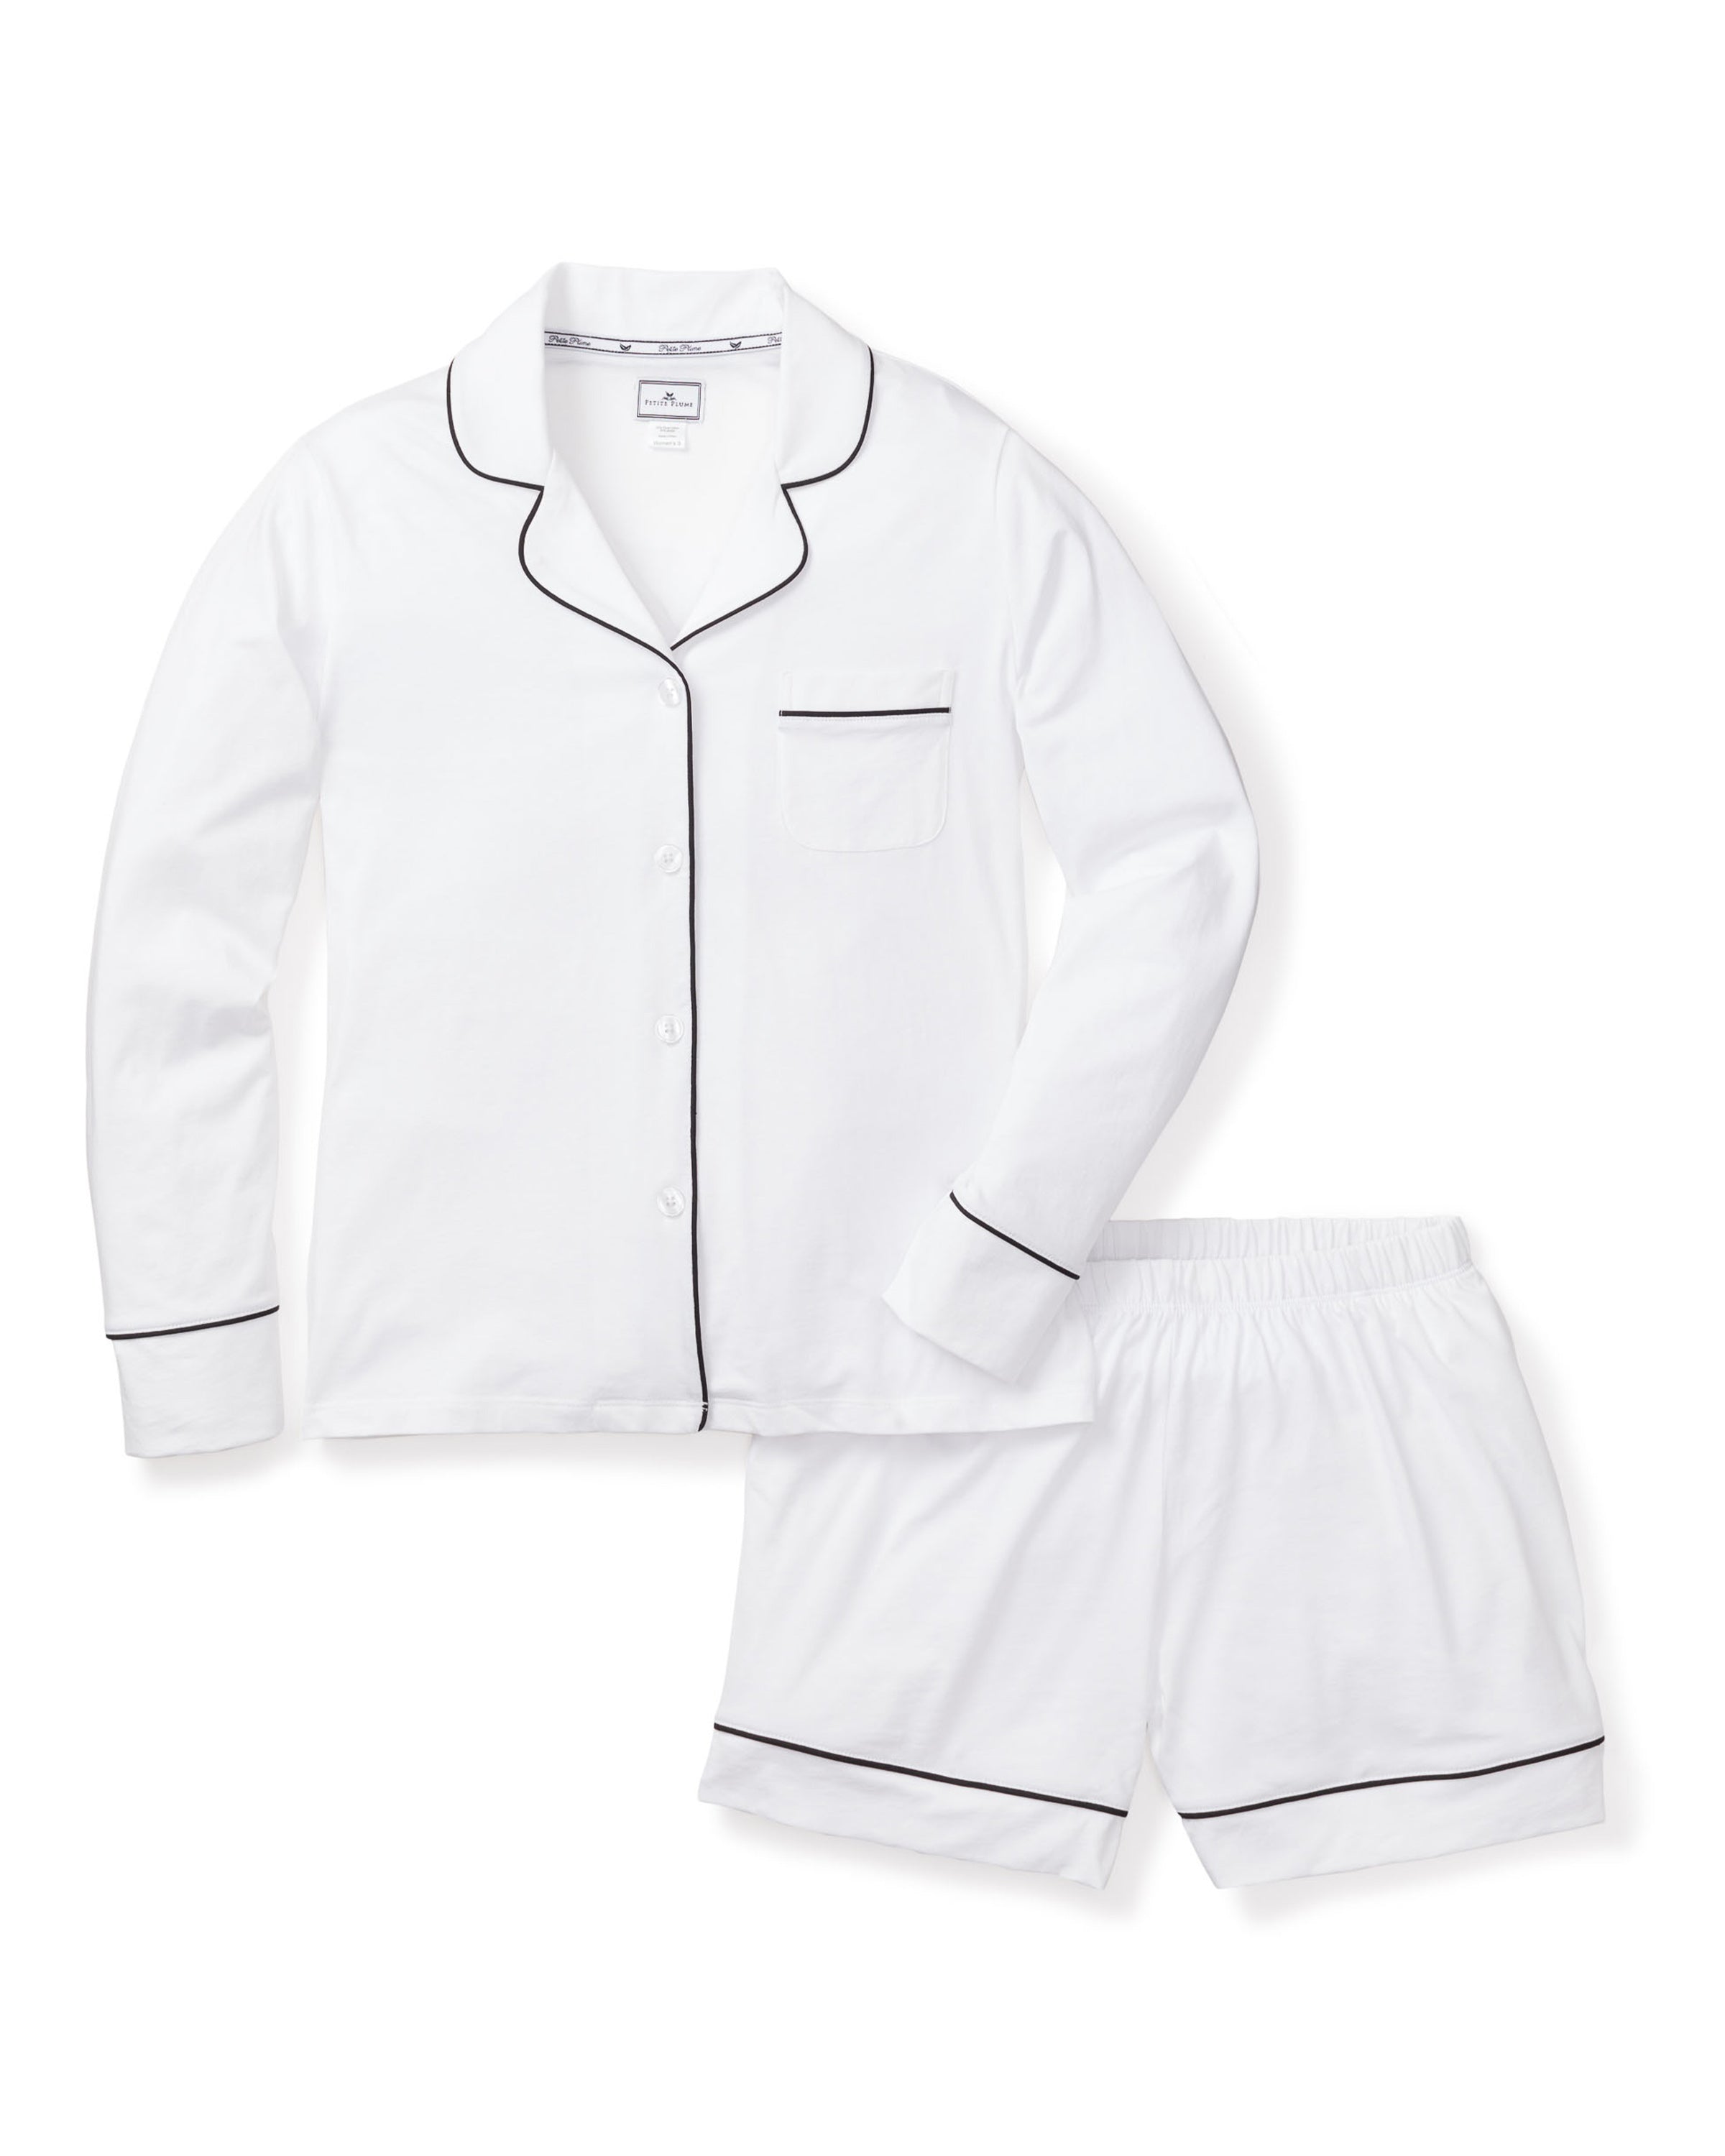 Women's Pima Long Sleeve Short Set in White with Black Piping